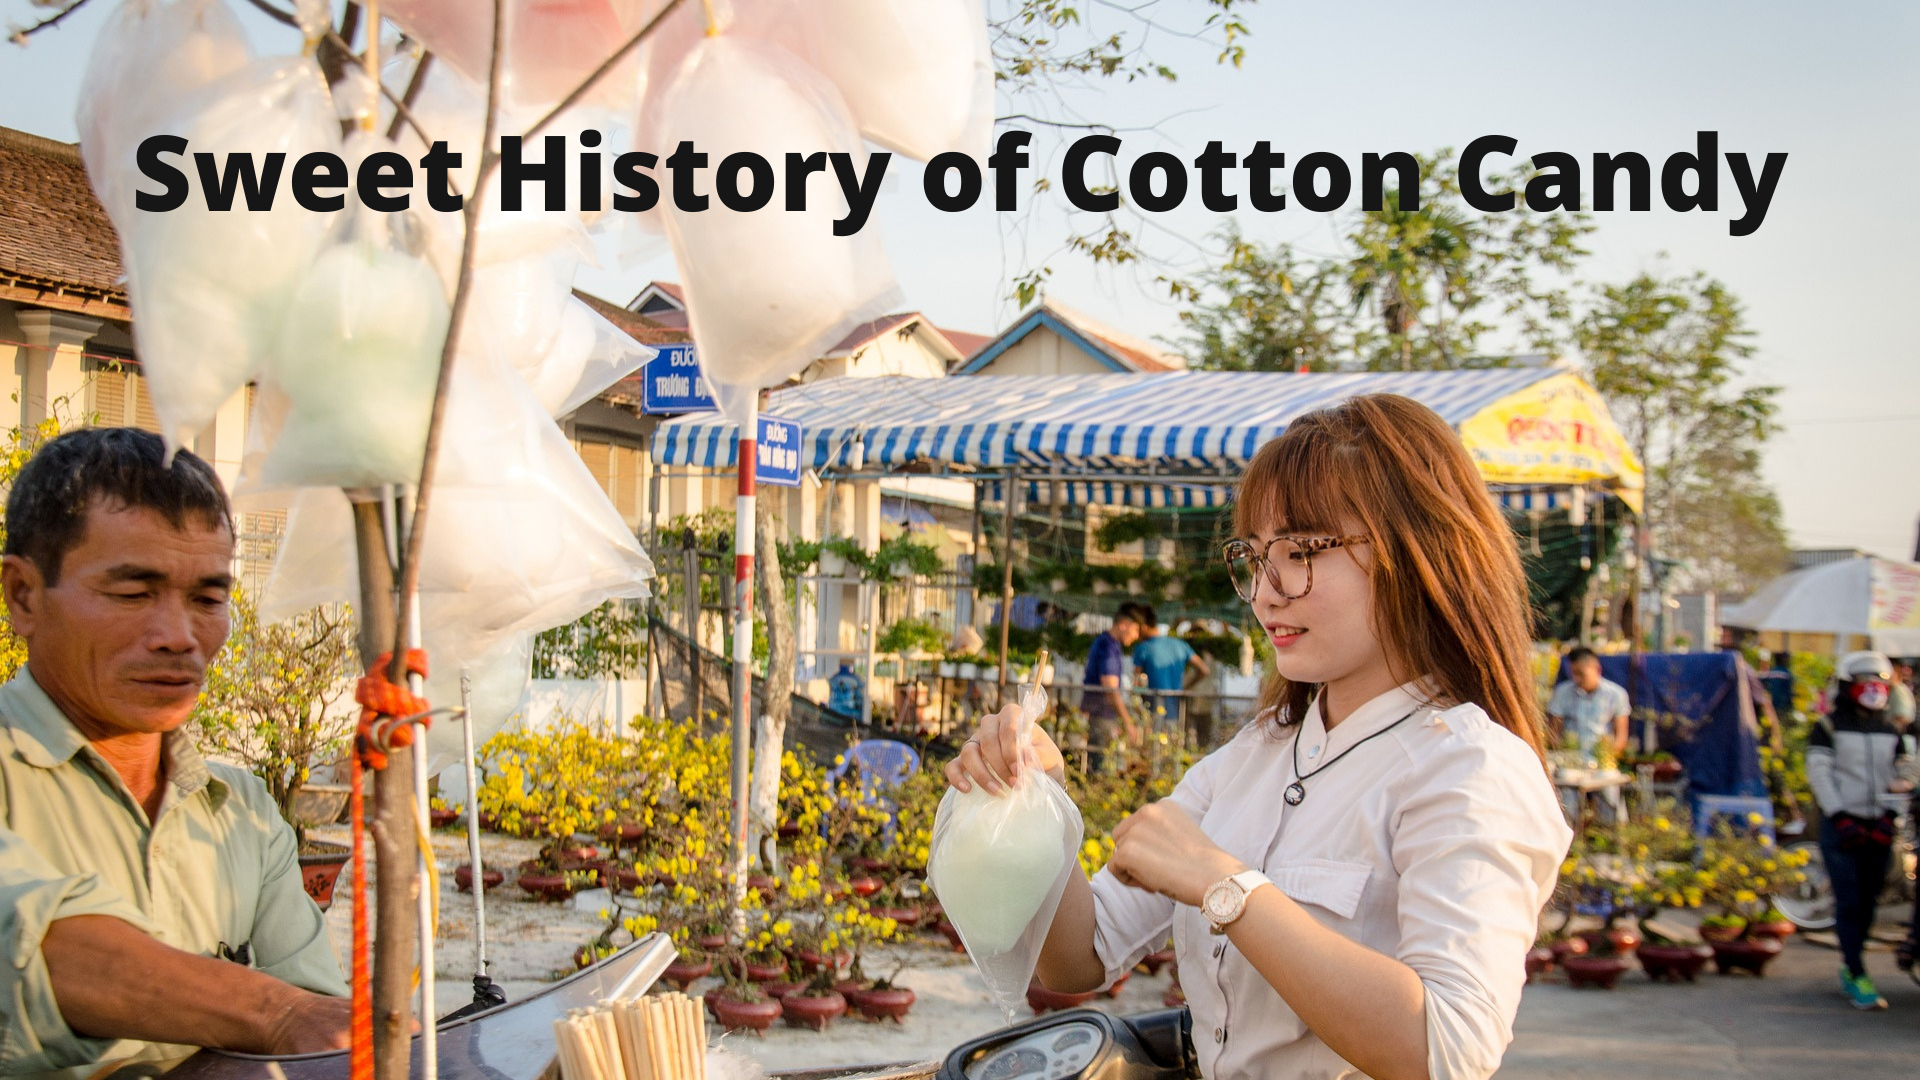 The Sweet History of Cotton Candy